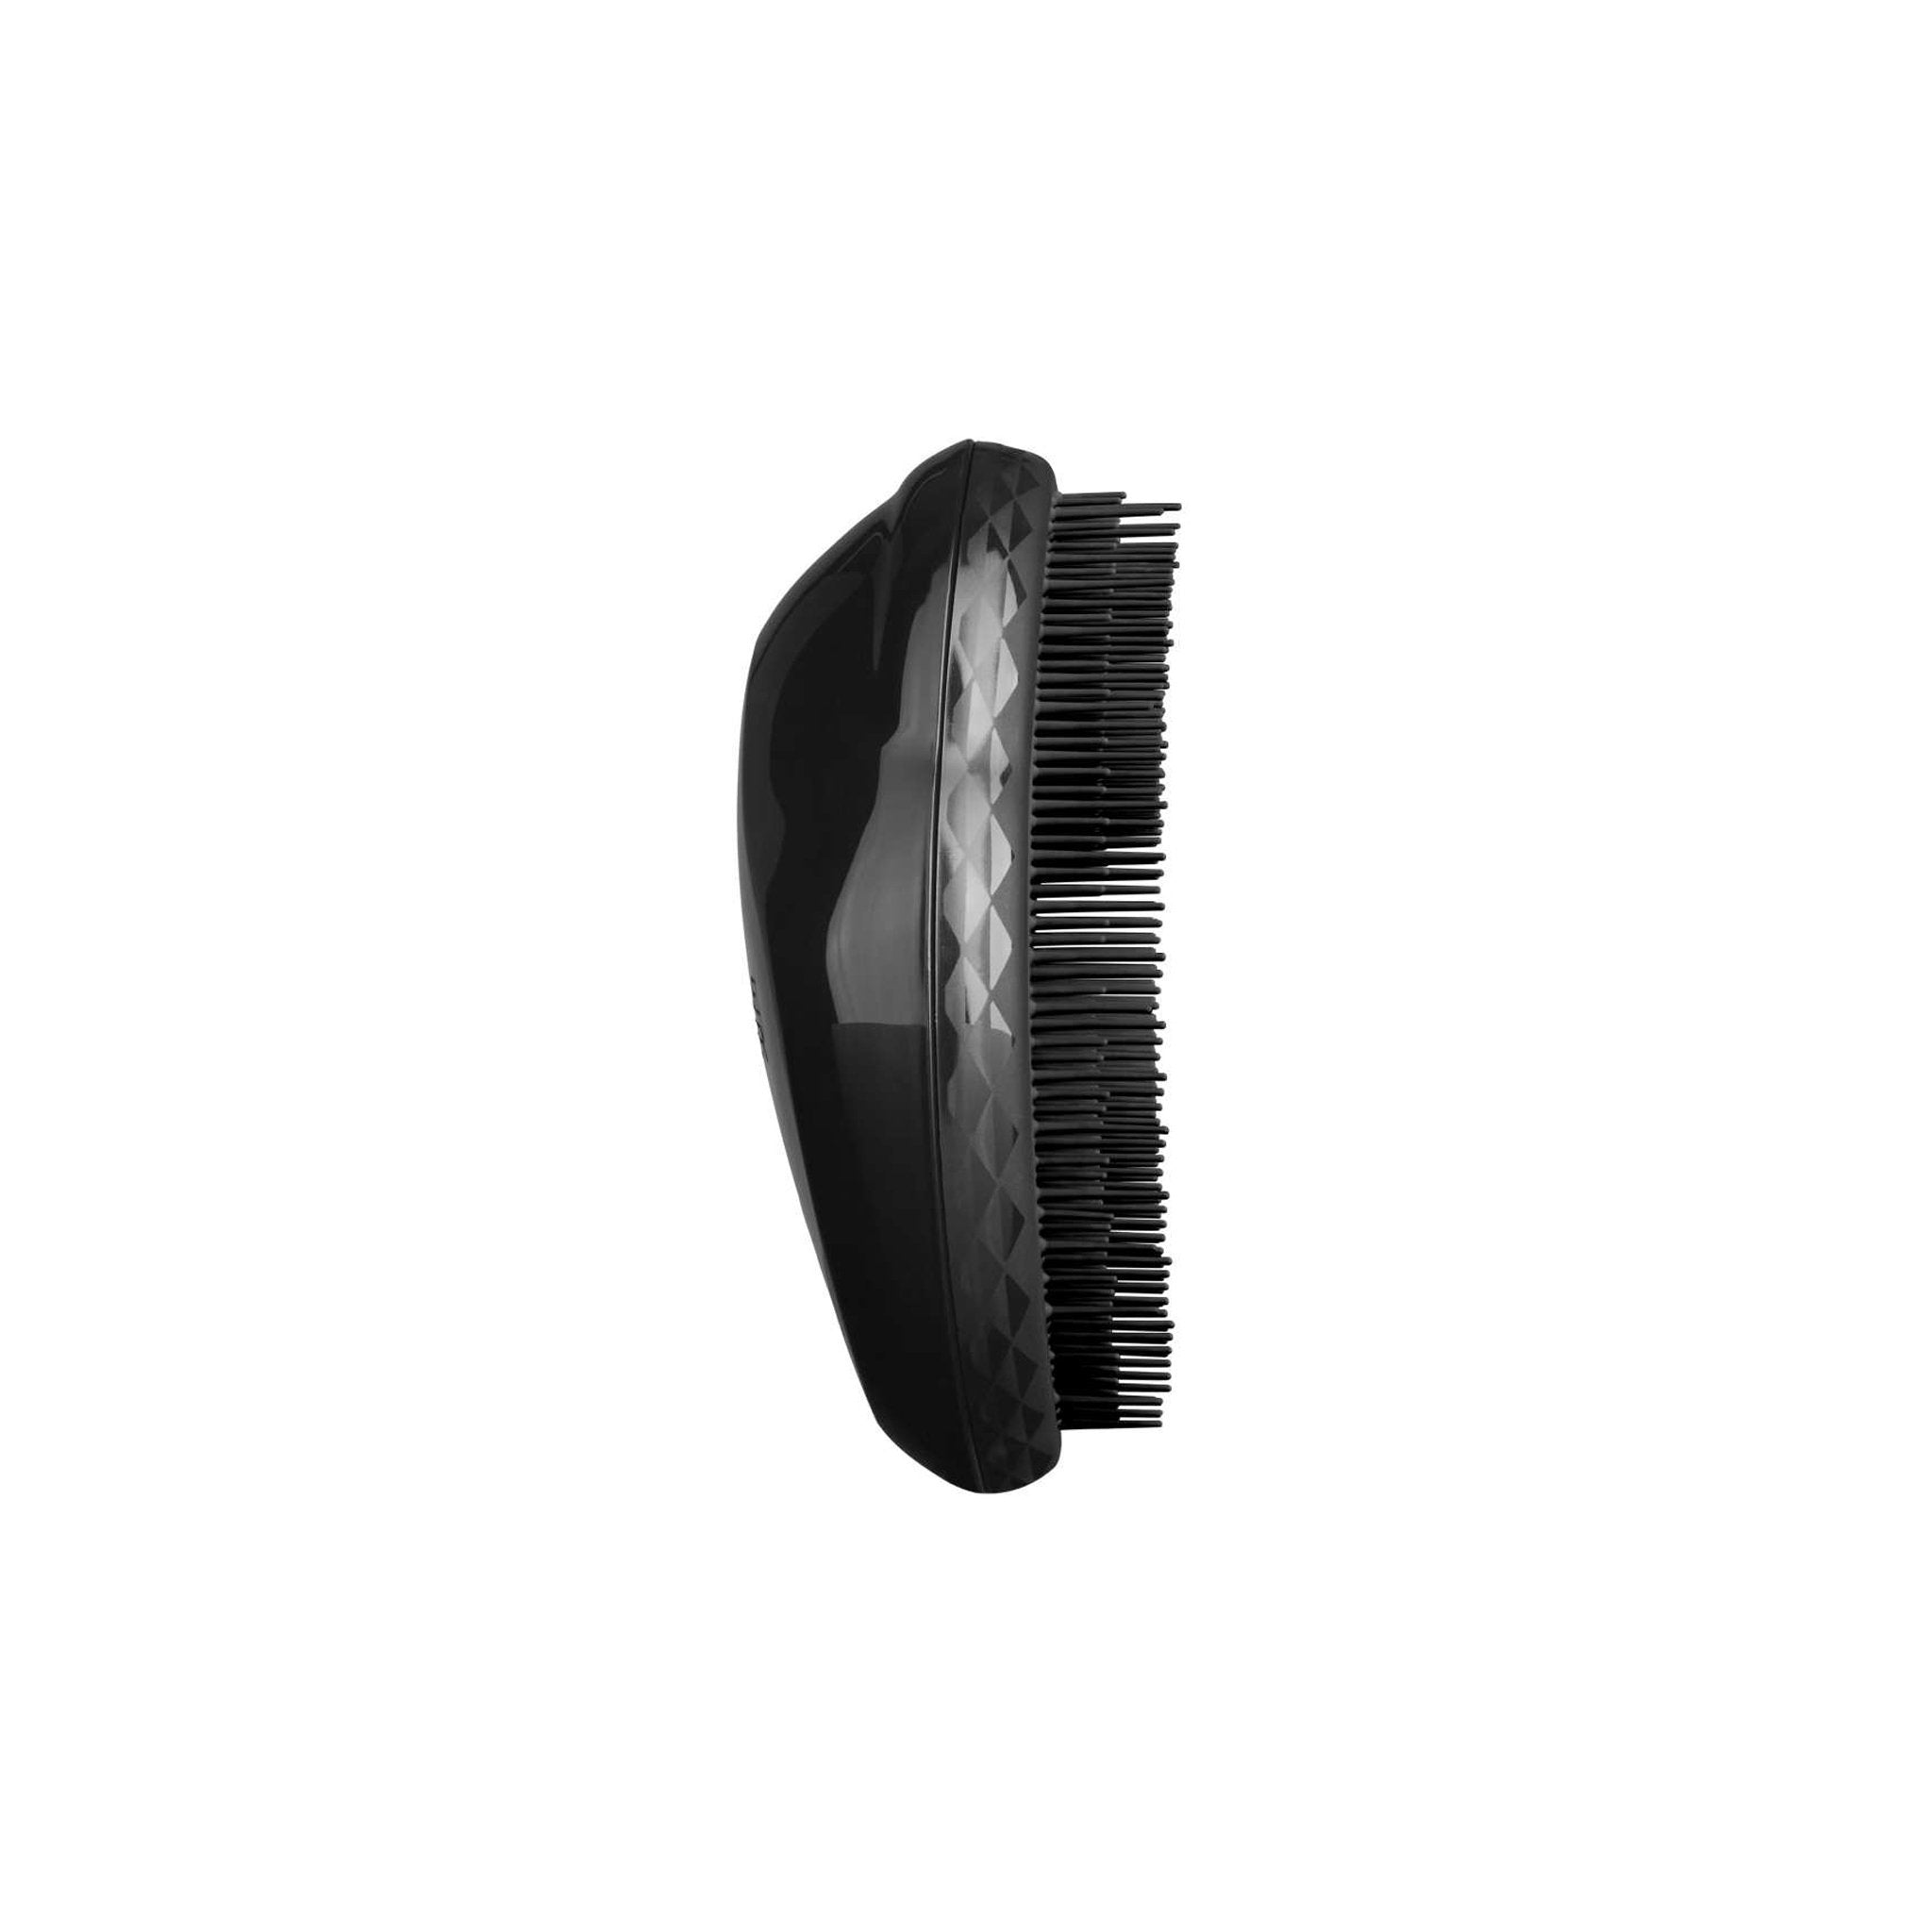 Tangle Teezer The Compact Styler Detangling Brush, Dry and Wet Hair Brush  Detangler for Traveling and Small Hands, Ivory Rose Gold